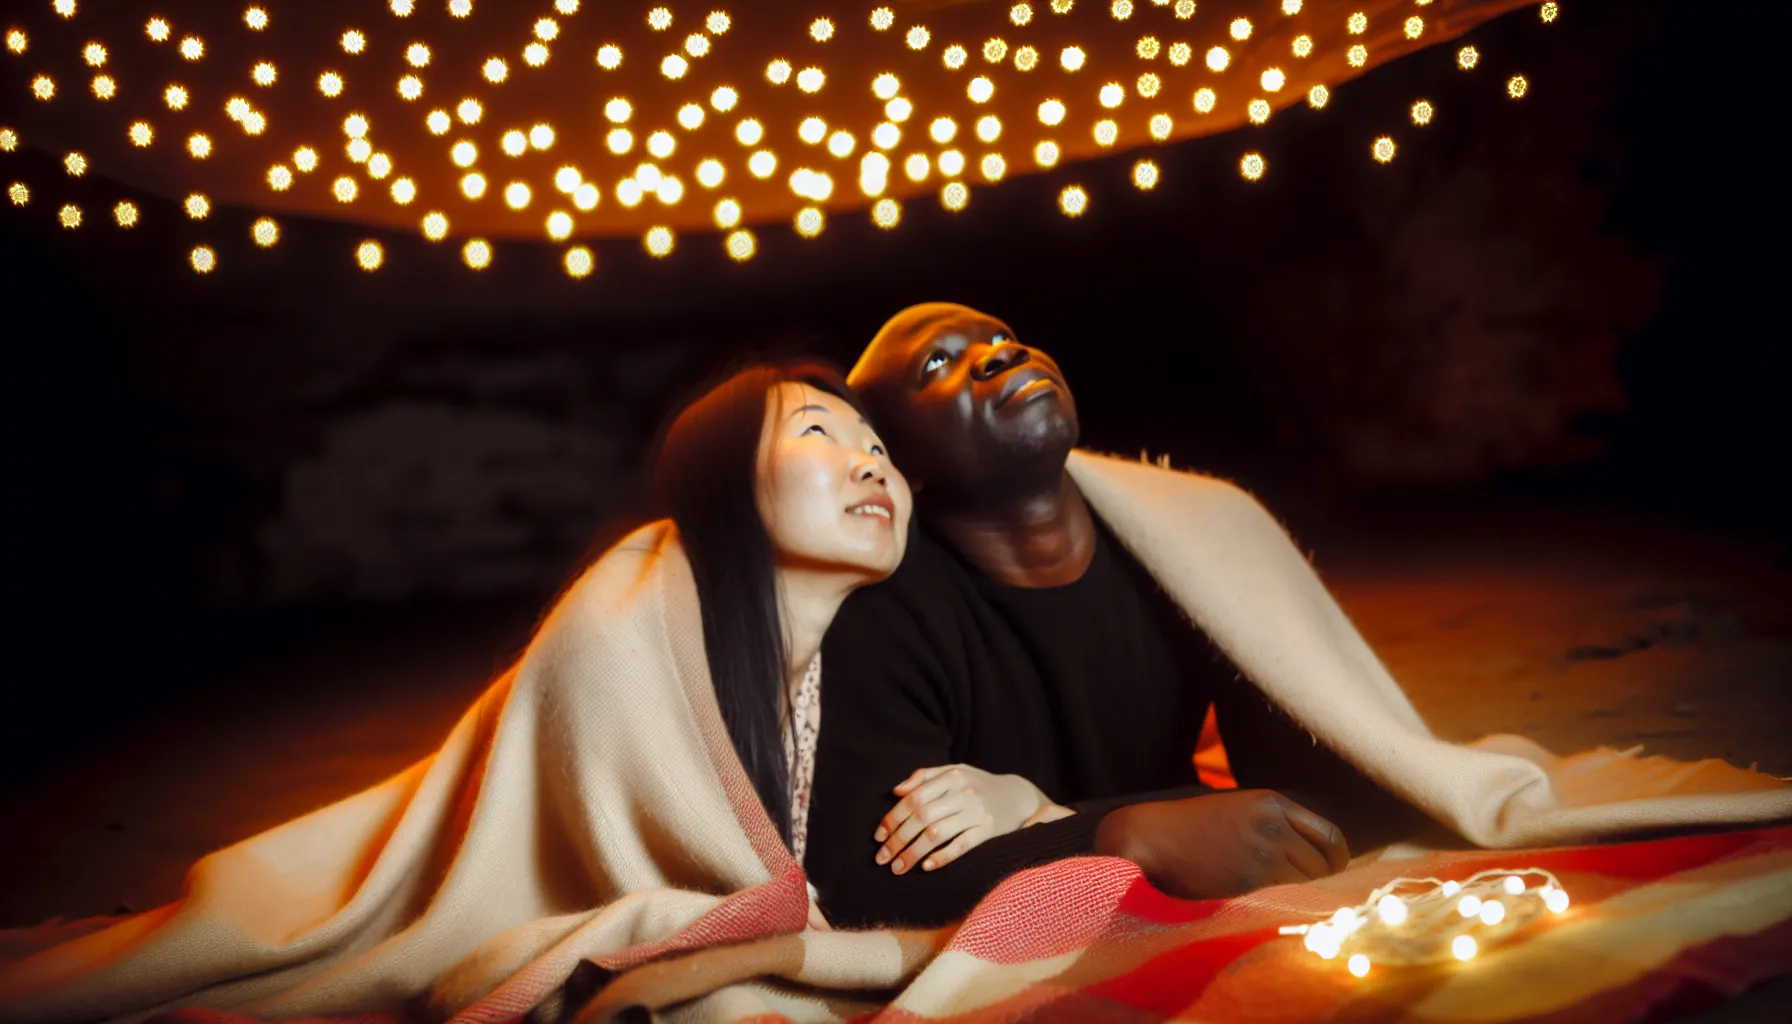 <strong>Under the veil of night</strong>, a couple finds solace in a shared whisper, their laughter mingling with the gentle twinkle of lights—a visual ode to the <strong>intimate tapestry of weeknight rendezvous</strong>.